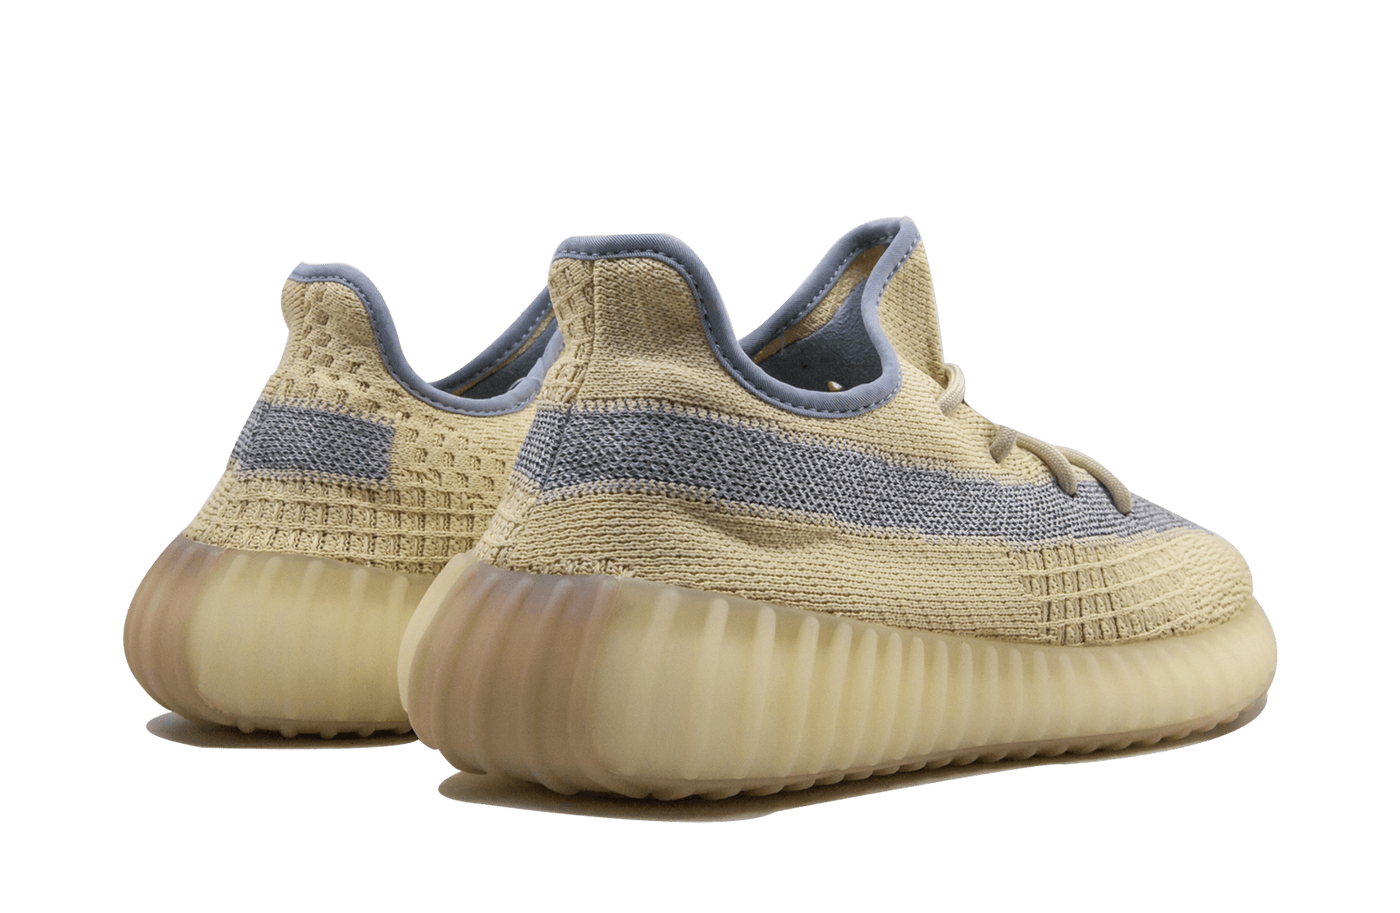 CHAUSSURES YEEZY YEEZY 350 V2 LIN